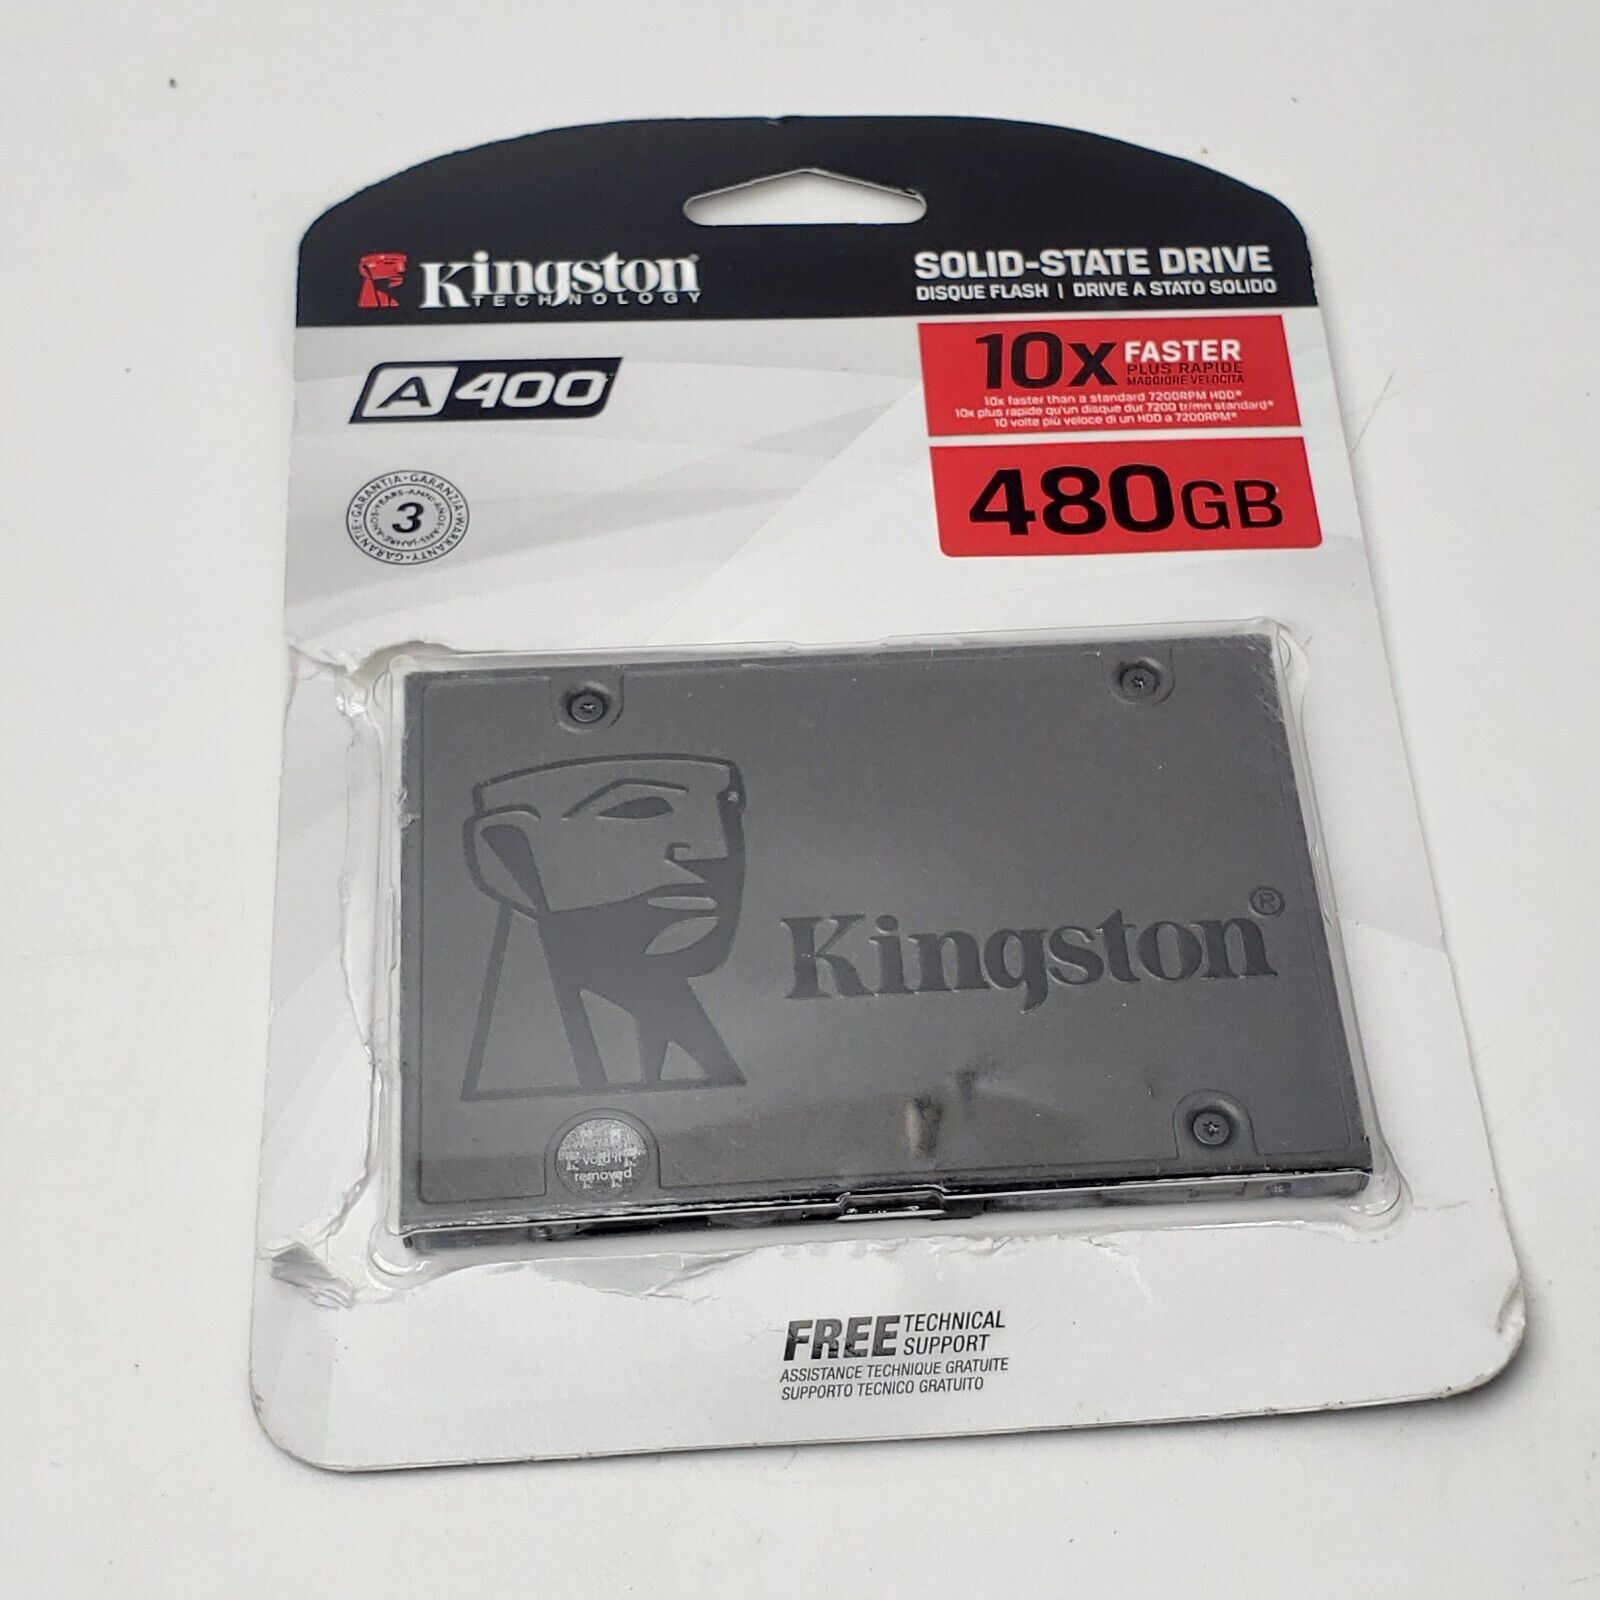 KINGSTON A400 480GB SOLID STATE DRIVE 2.5